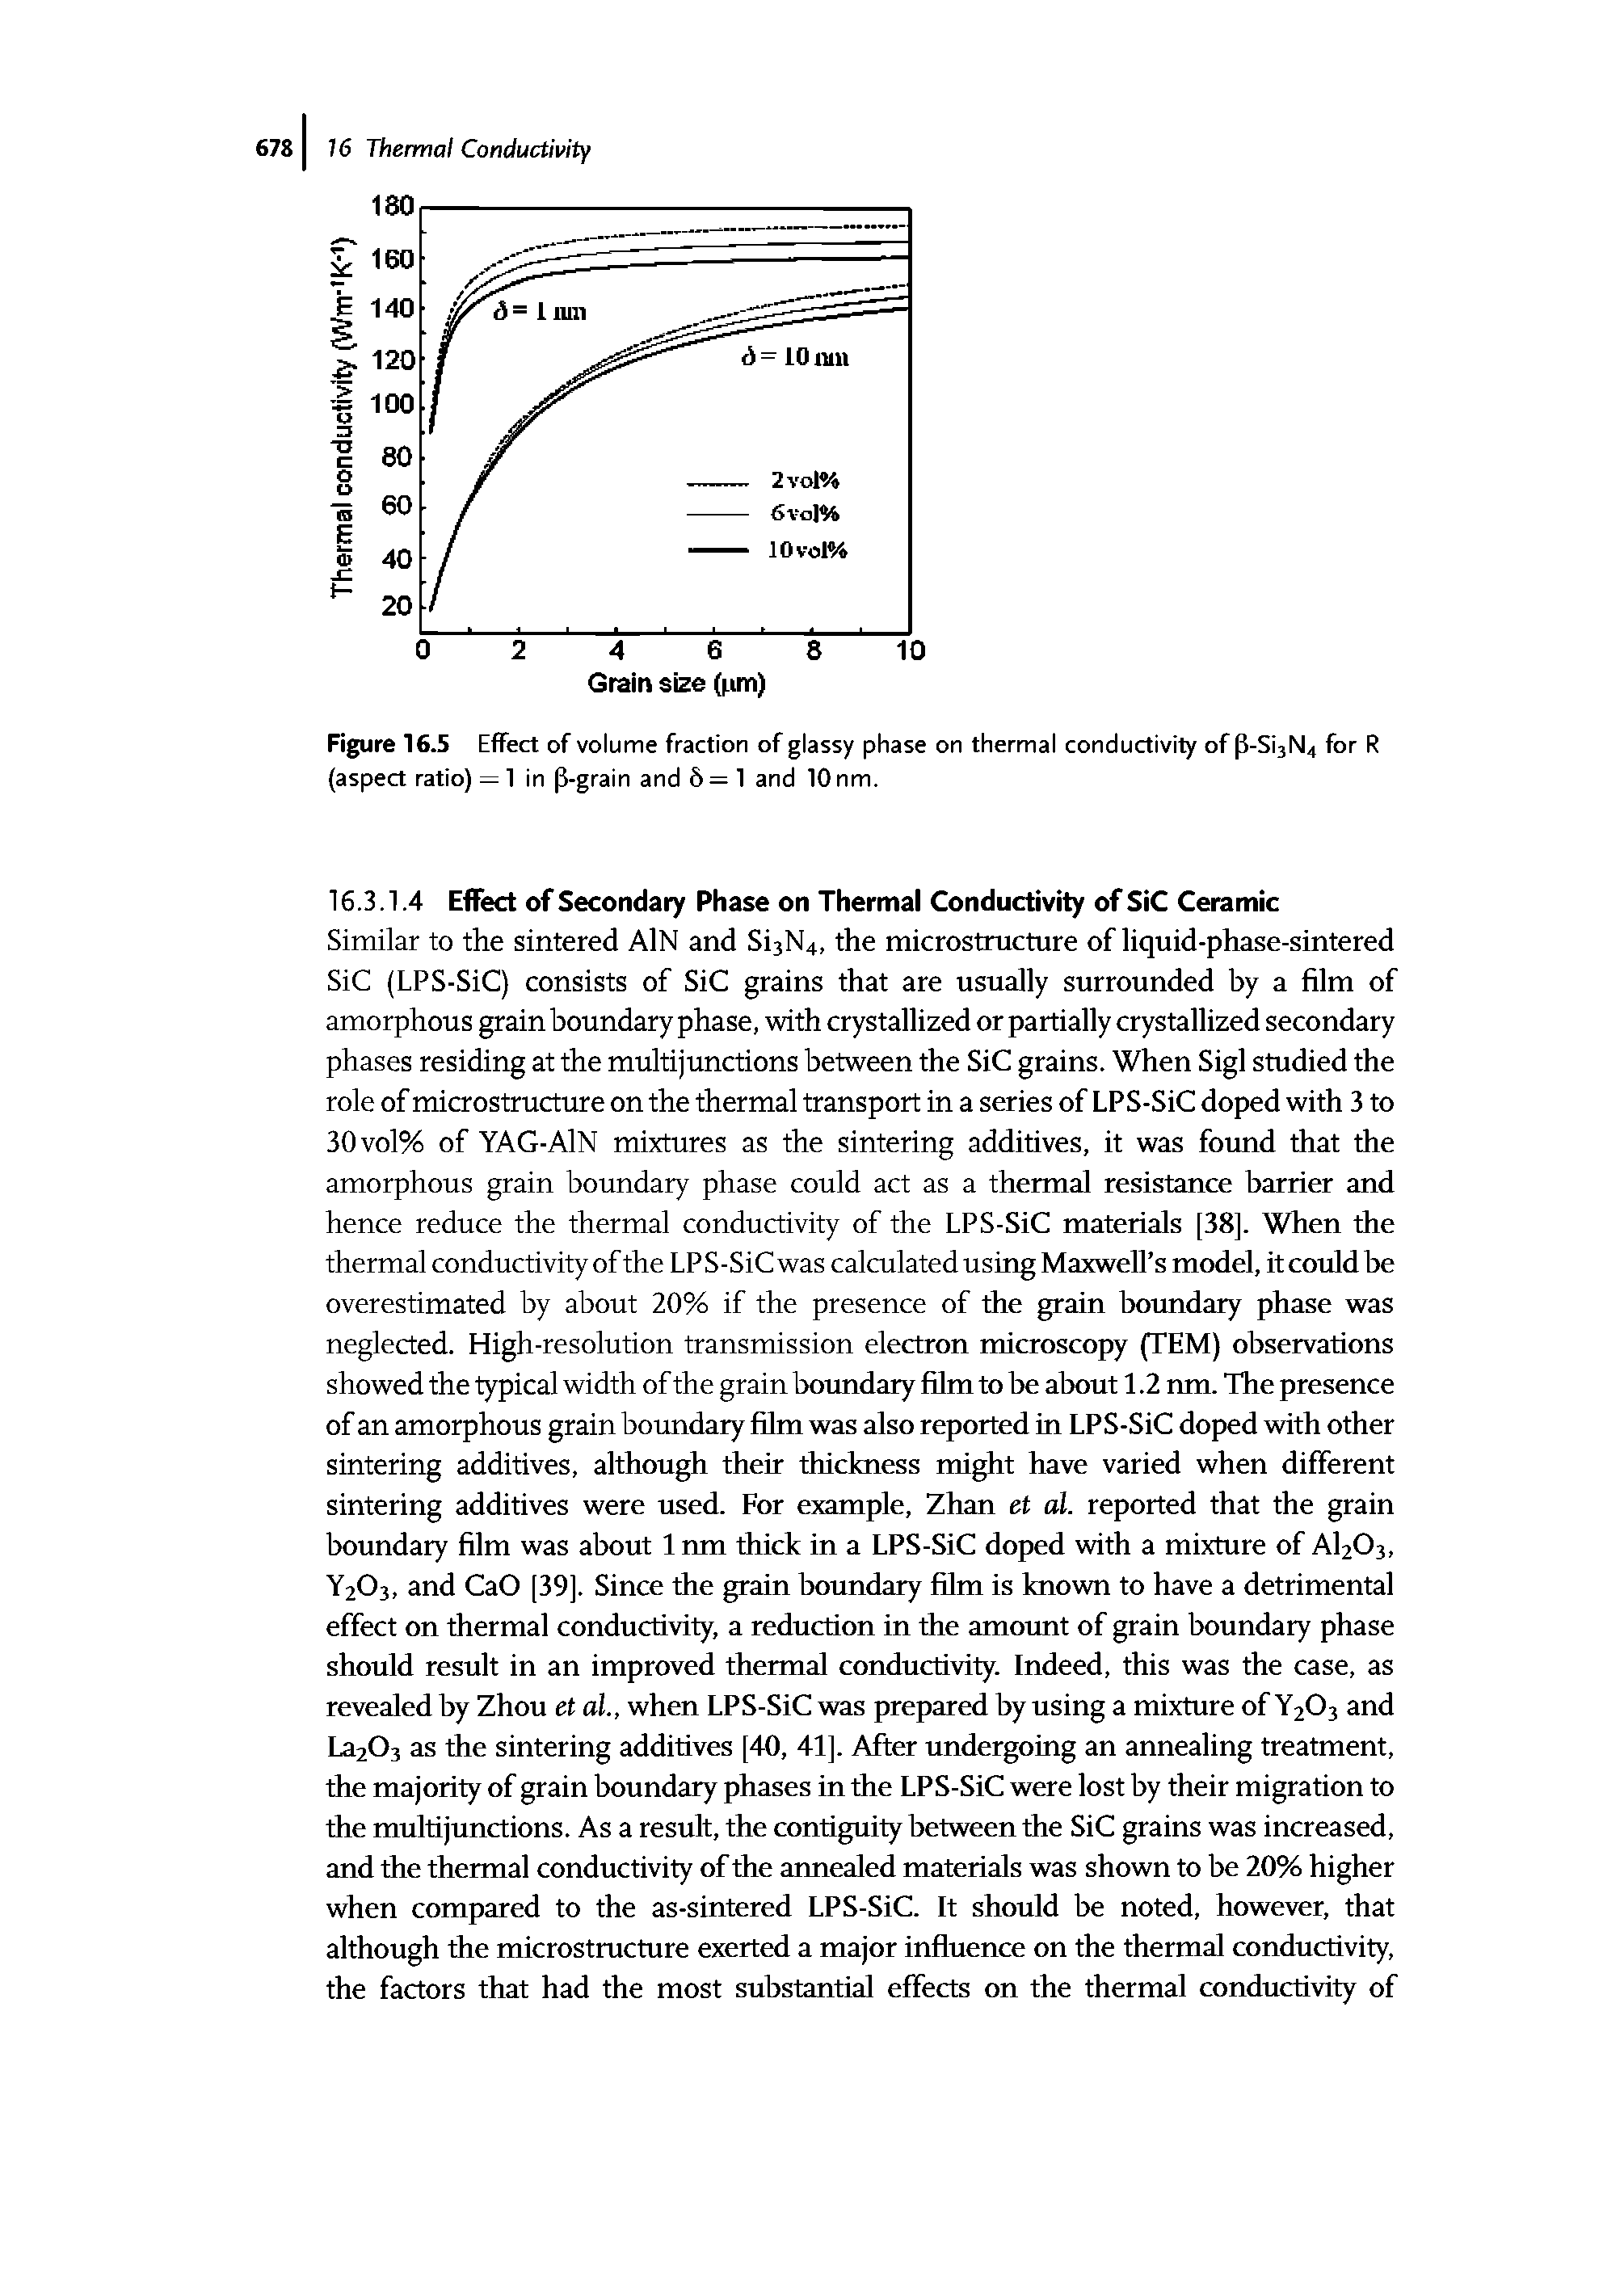 Figure 16.5 Effect of volume fraction of glassy phase on thermal conductivity of 3-Si3N4 for R (aspert ratio) = 1 in 3-grain and 6= 1 and 10 nm.